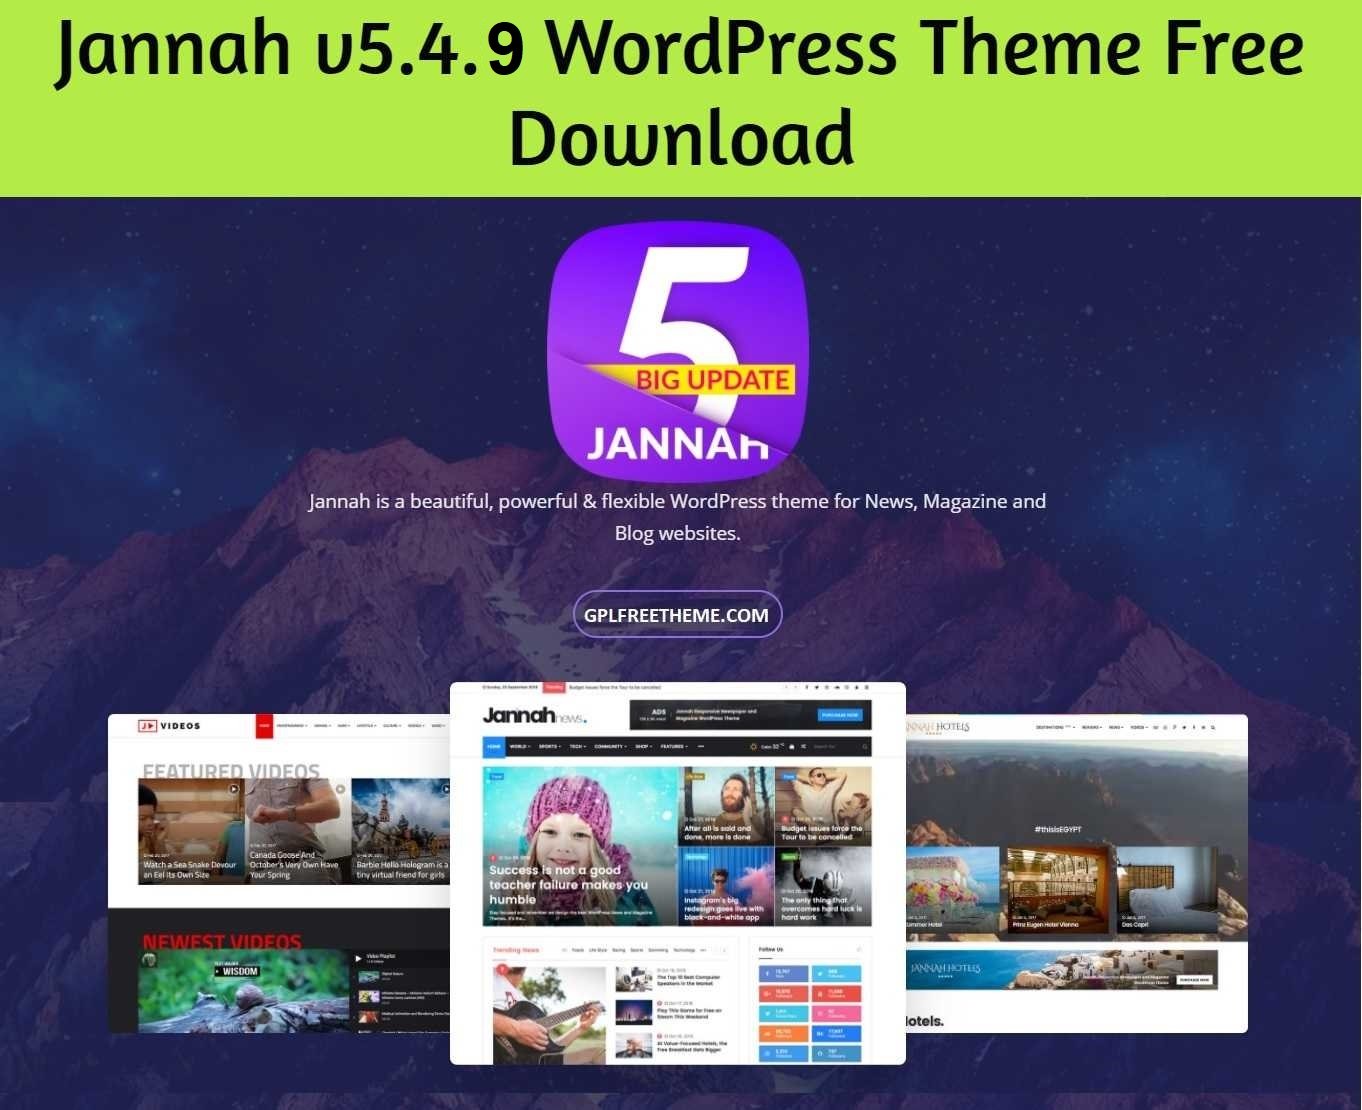 Jannah v5.4.9 WordPress Theme Free Download [Activated]